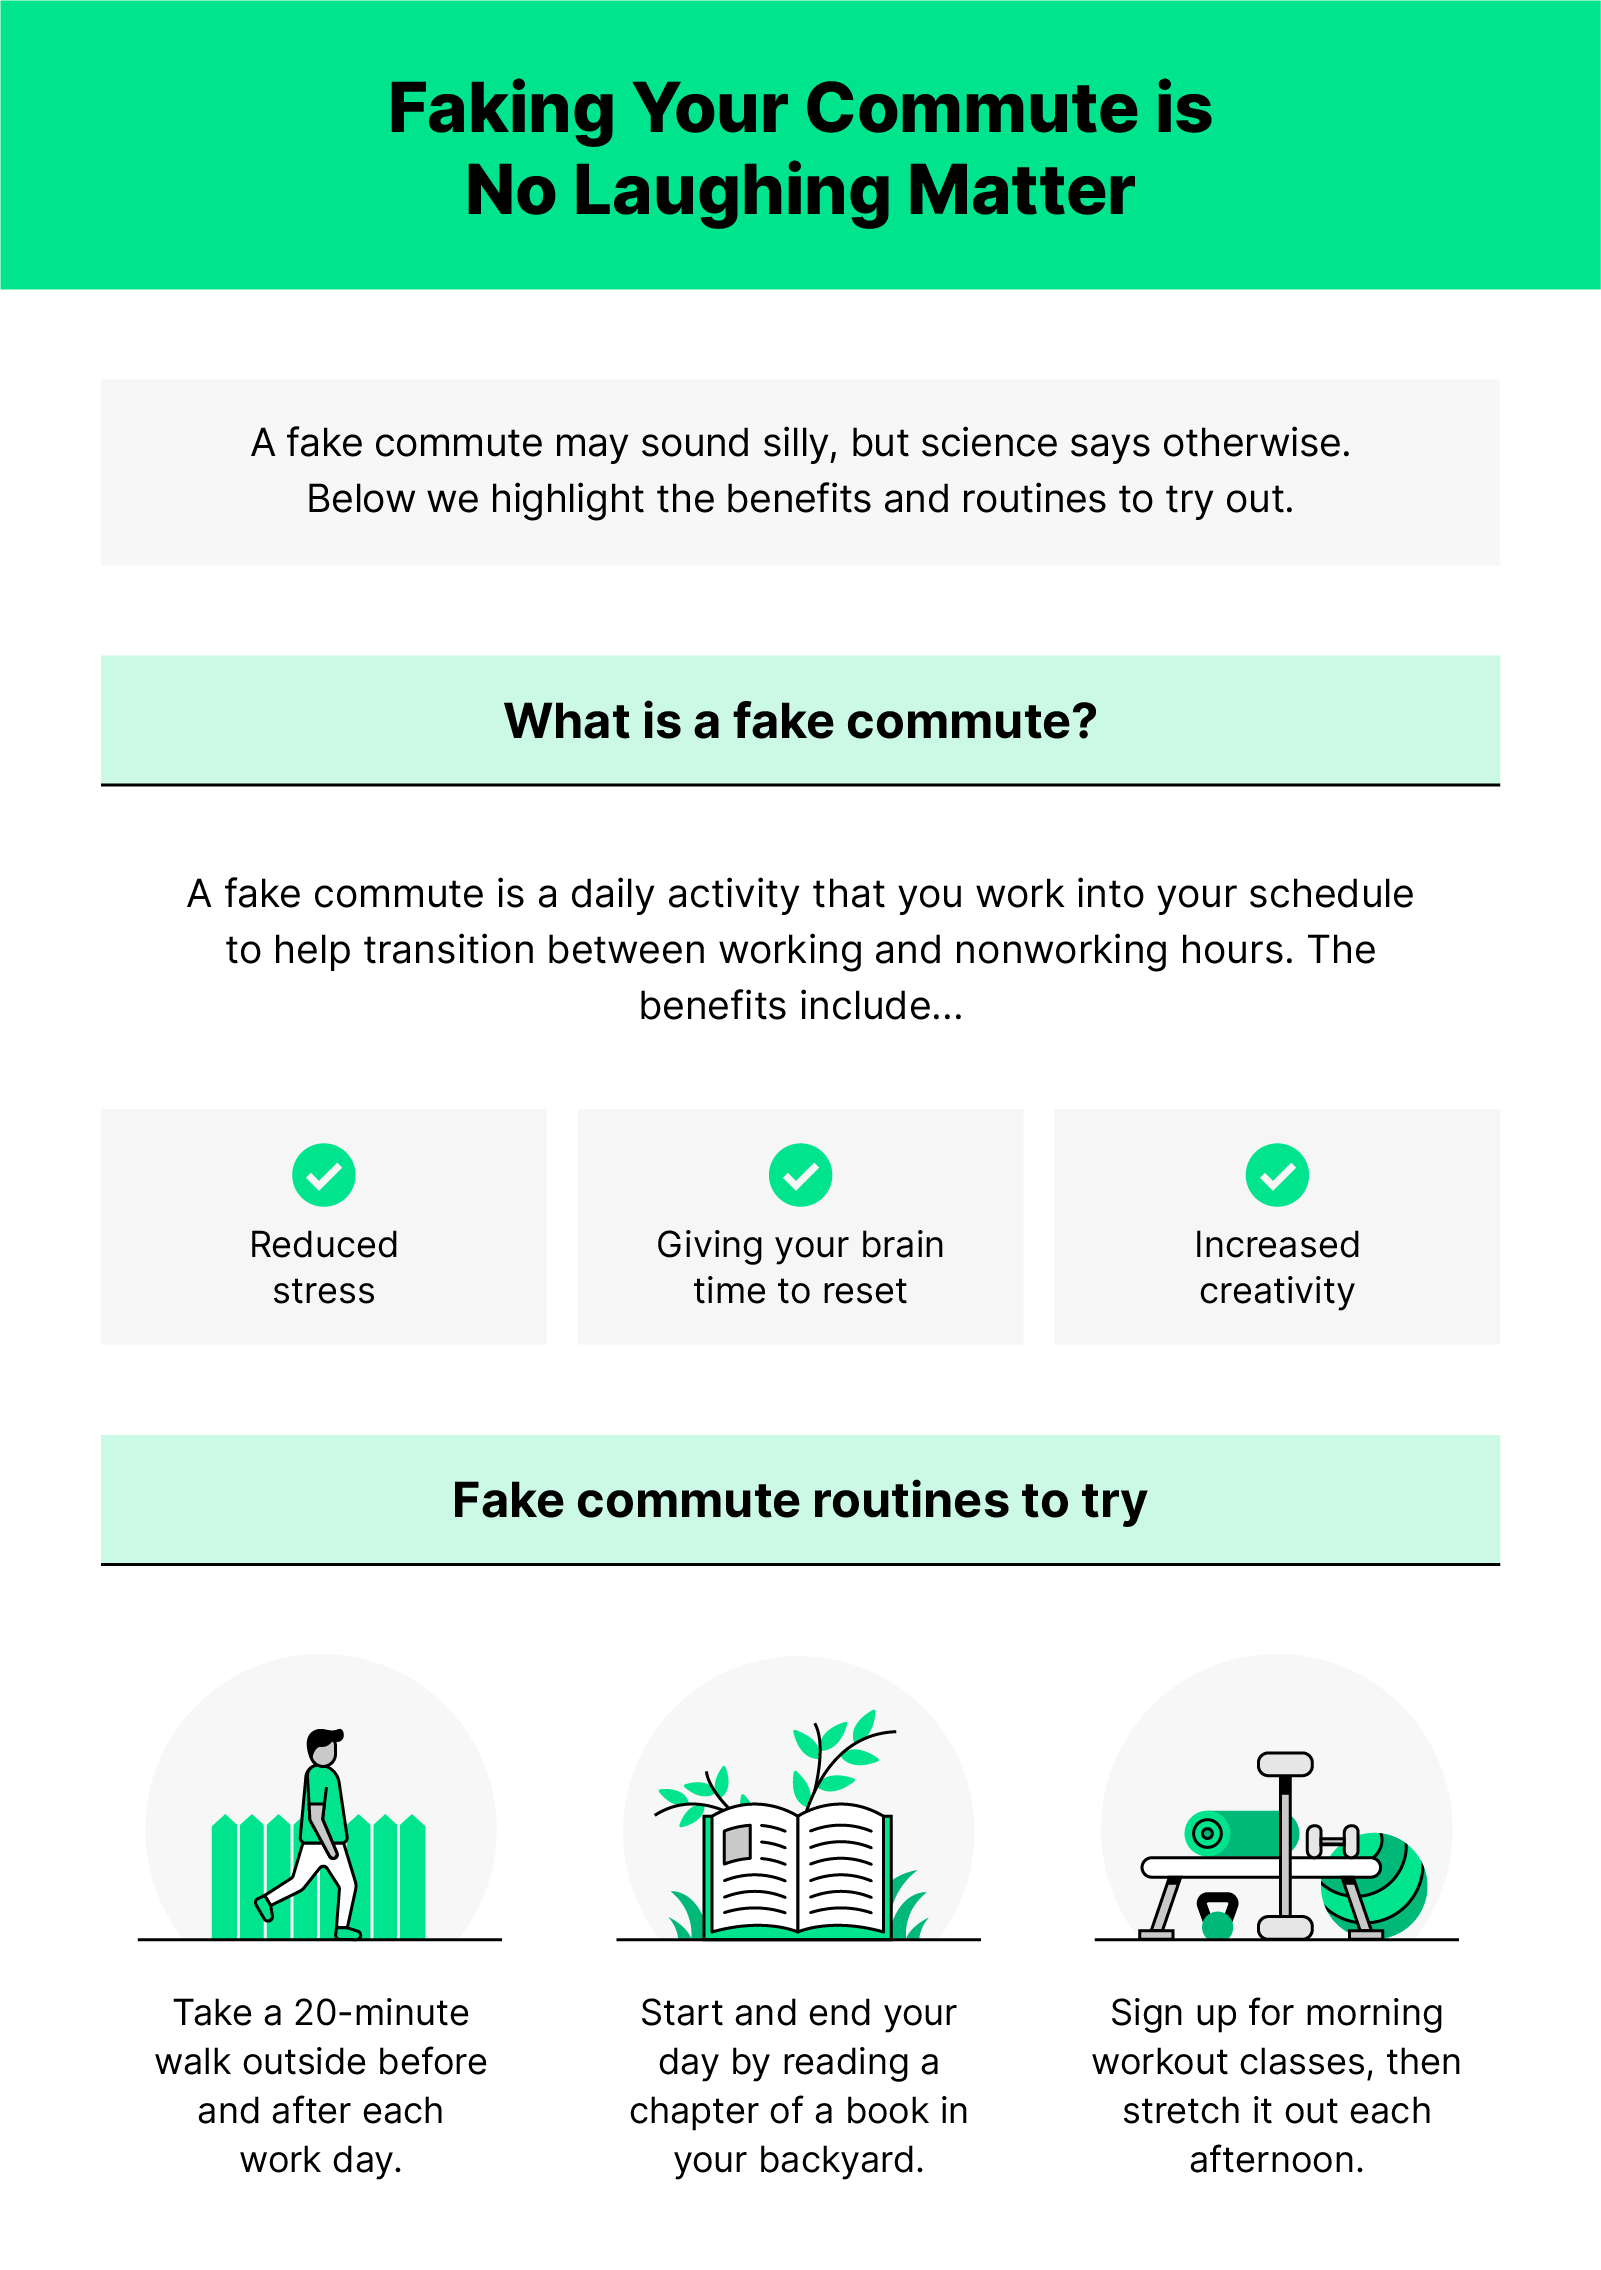 Info on fake commuting with small illustrations of a person walking outside, a book and exercise equipment